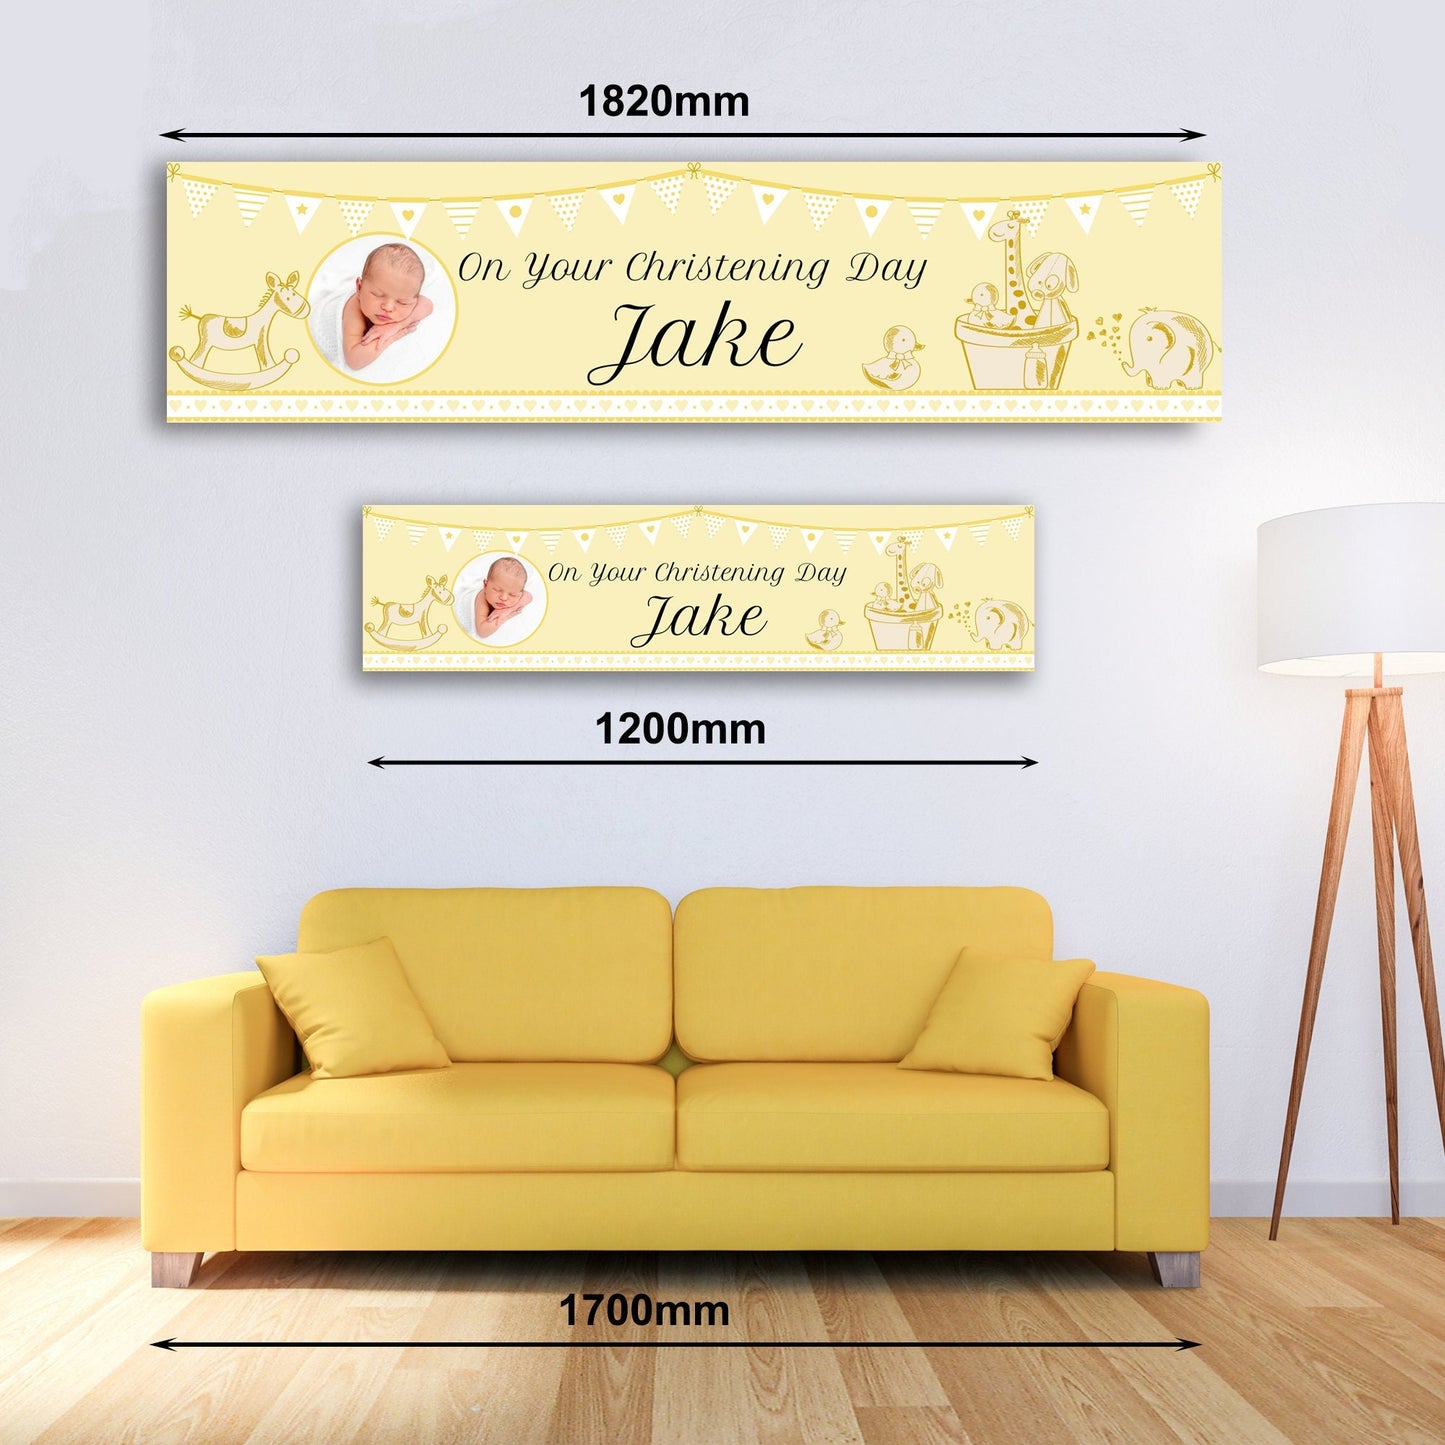 Personalised Banner - Christening Banner with Photo Yellow Personalised Christening Banner